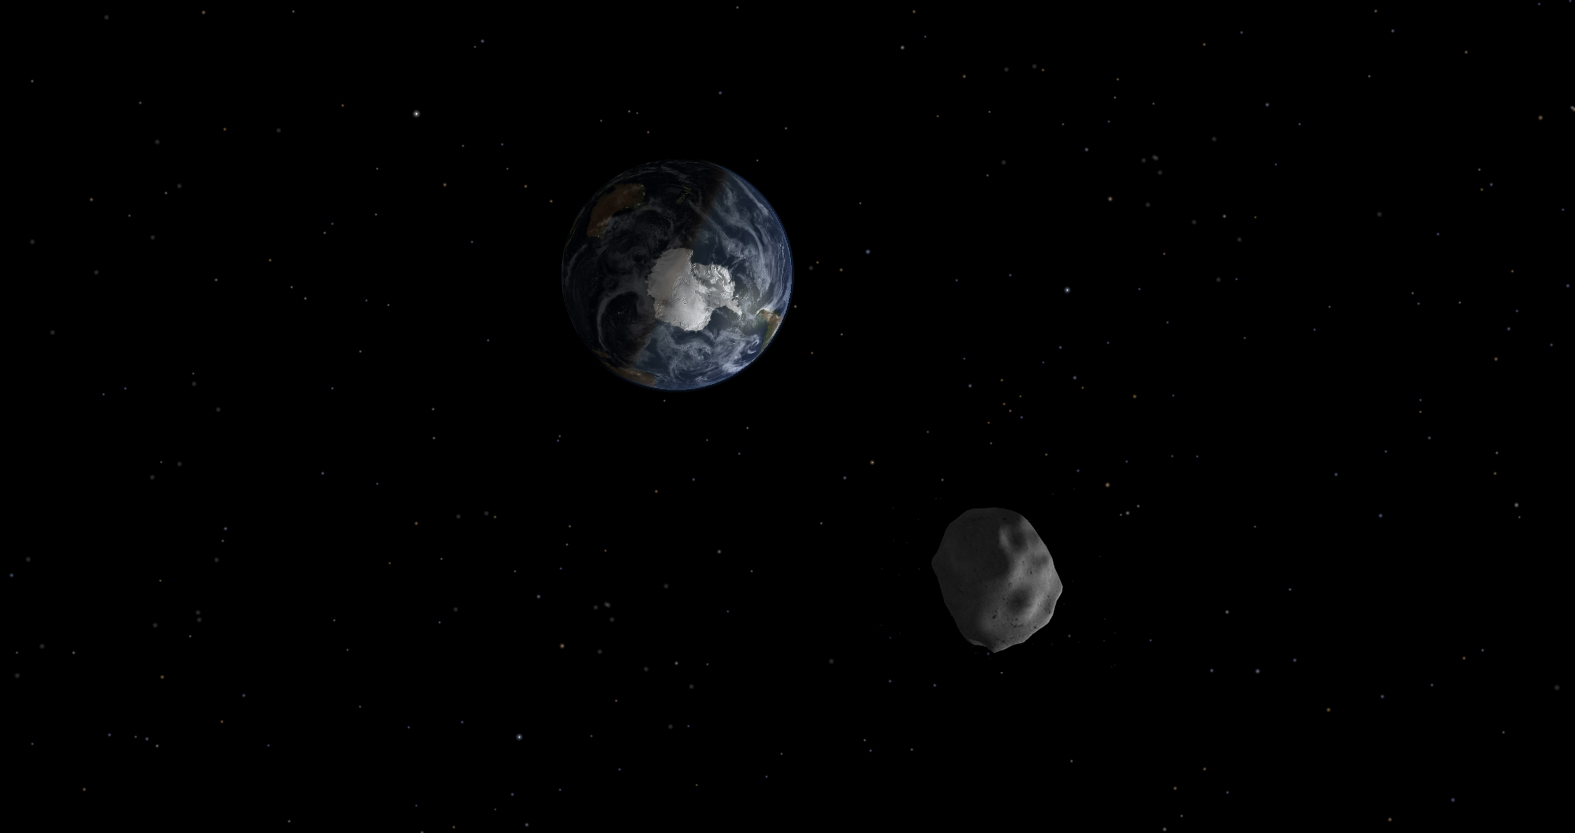 Diagram depicting the passage of asteroid 2012 DA14 through the Earth-moon system on Feb. 15, 2013.